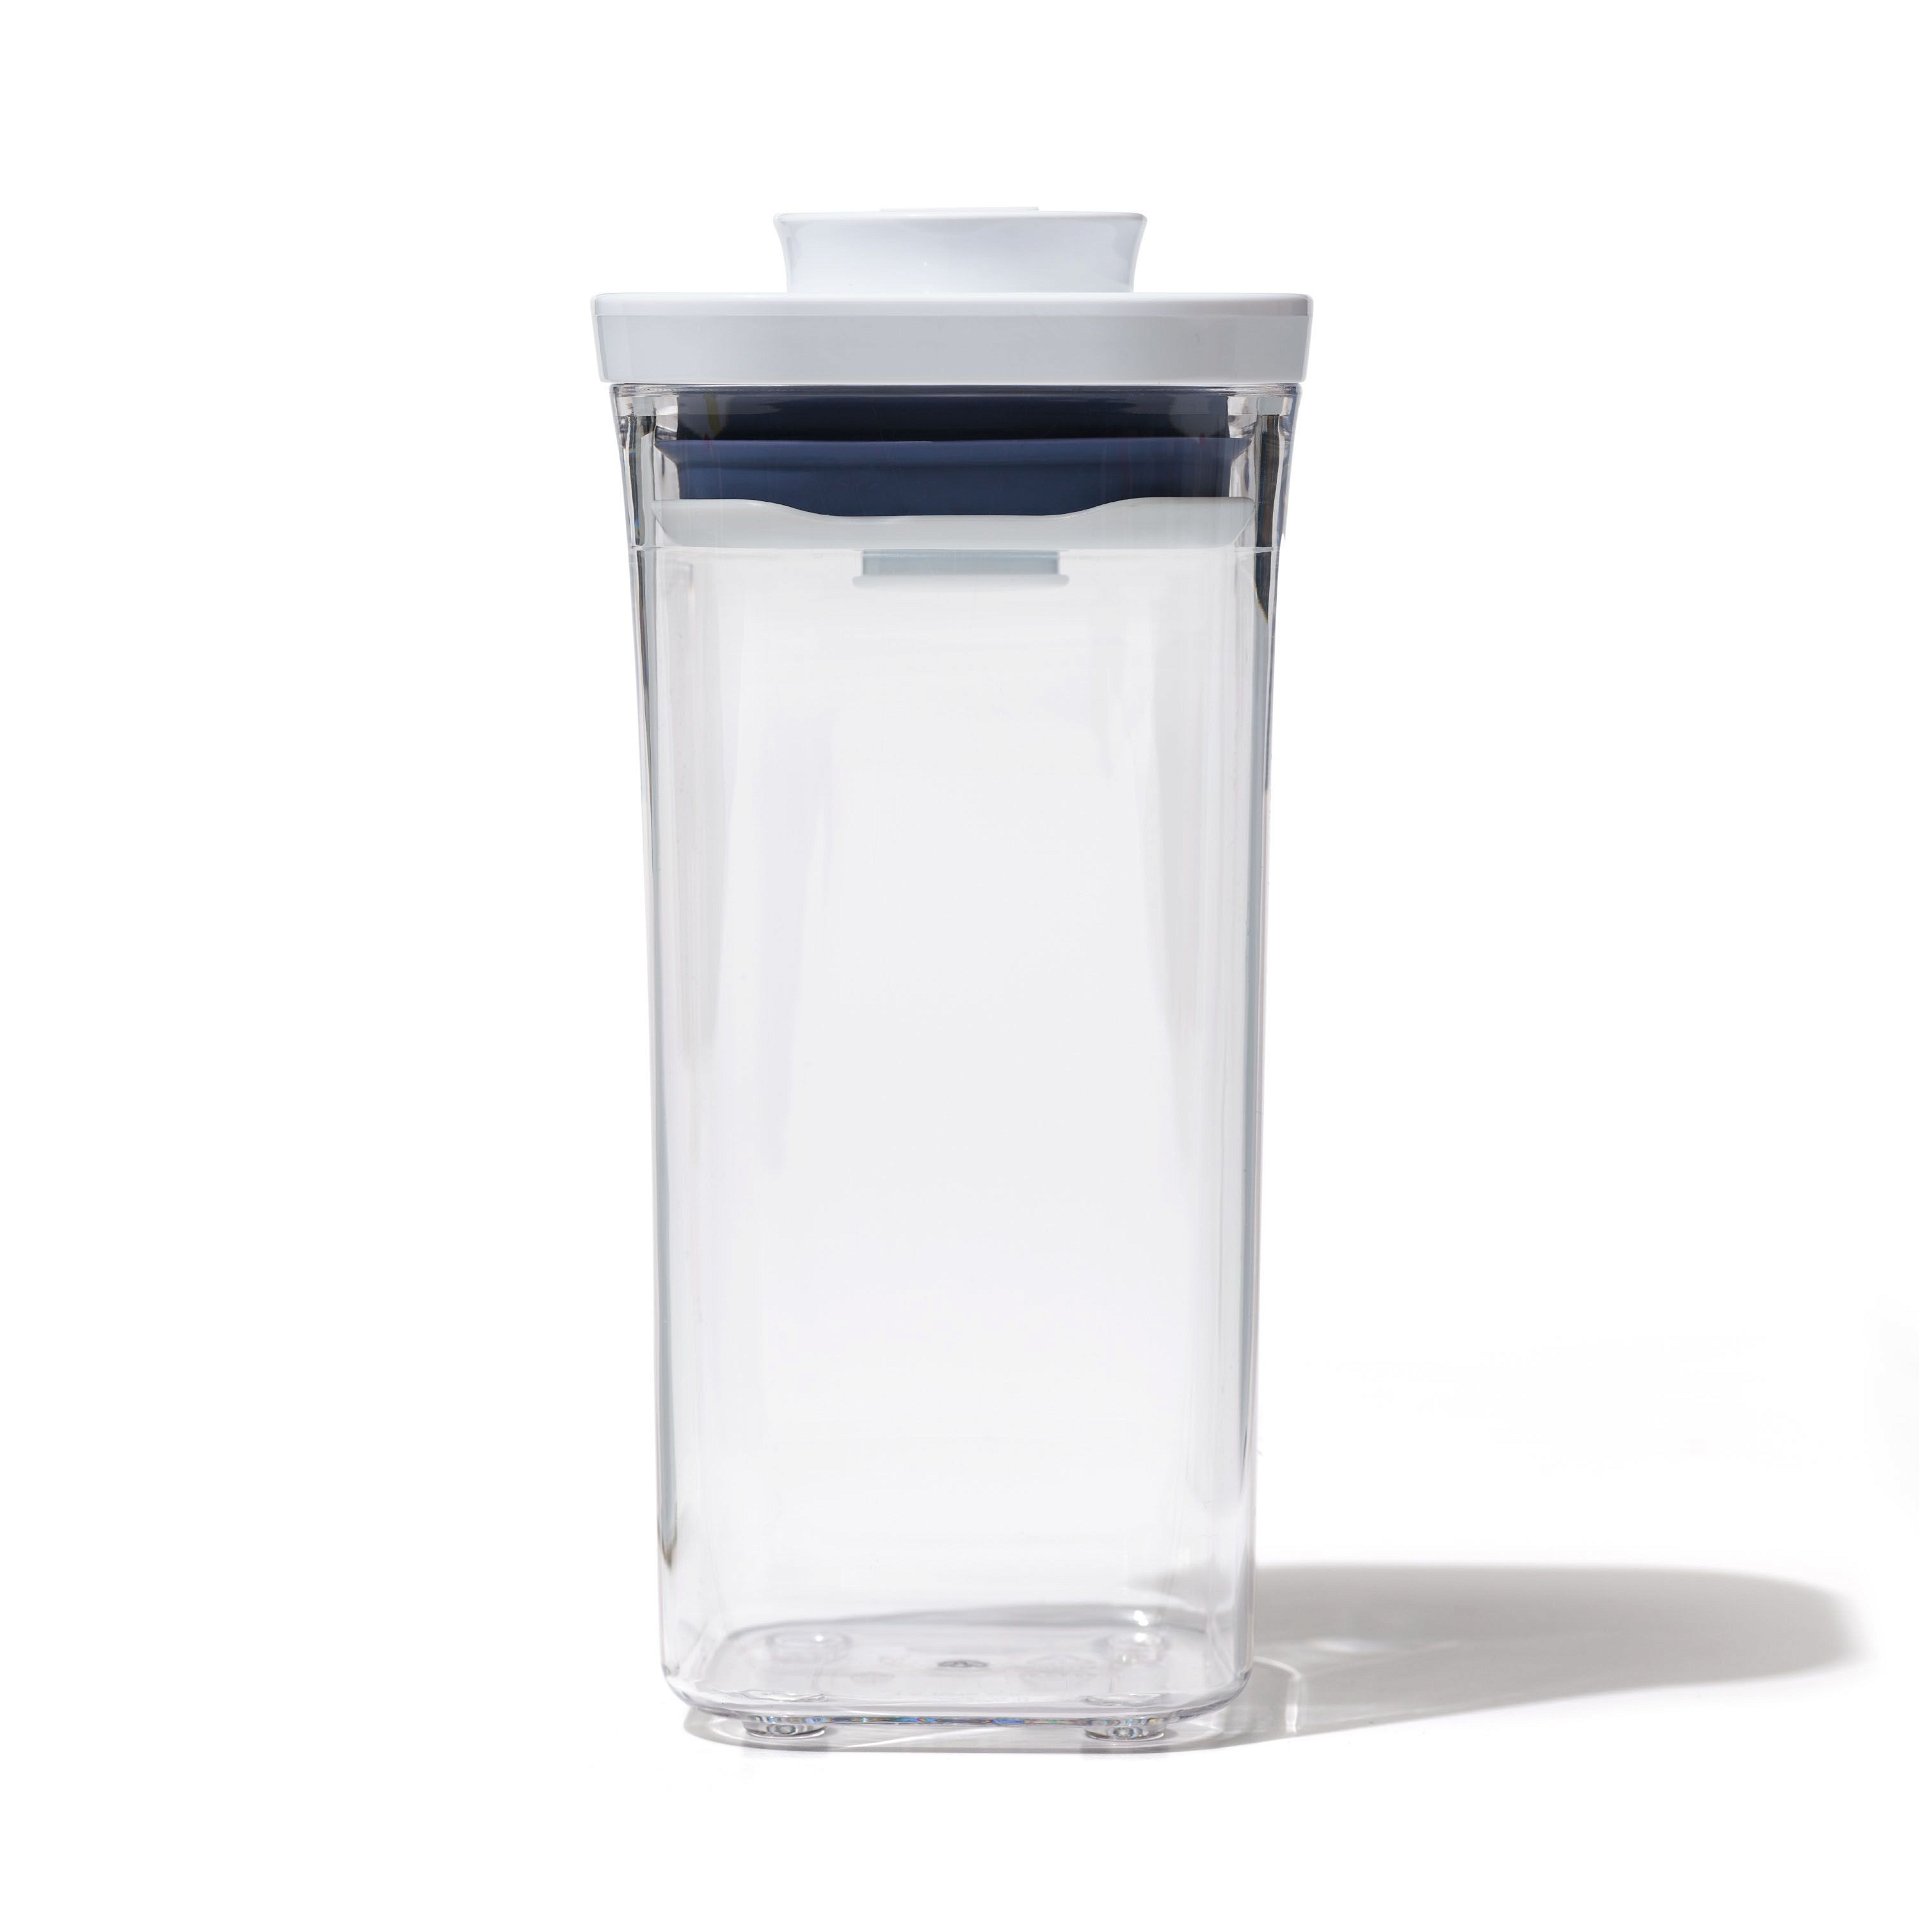 OXO POP 2.0 Small Square Airtight Container Short Steel 1L Brand New